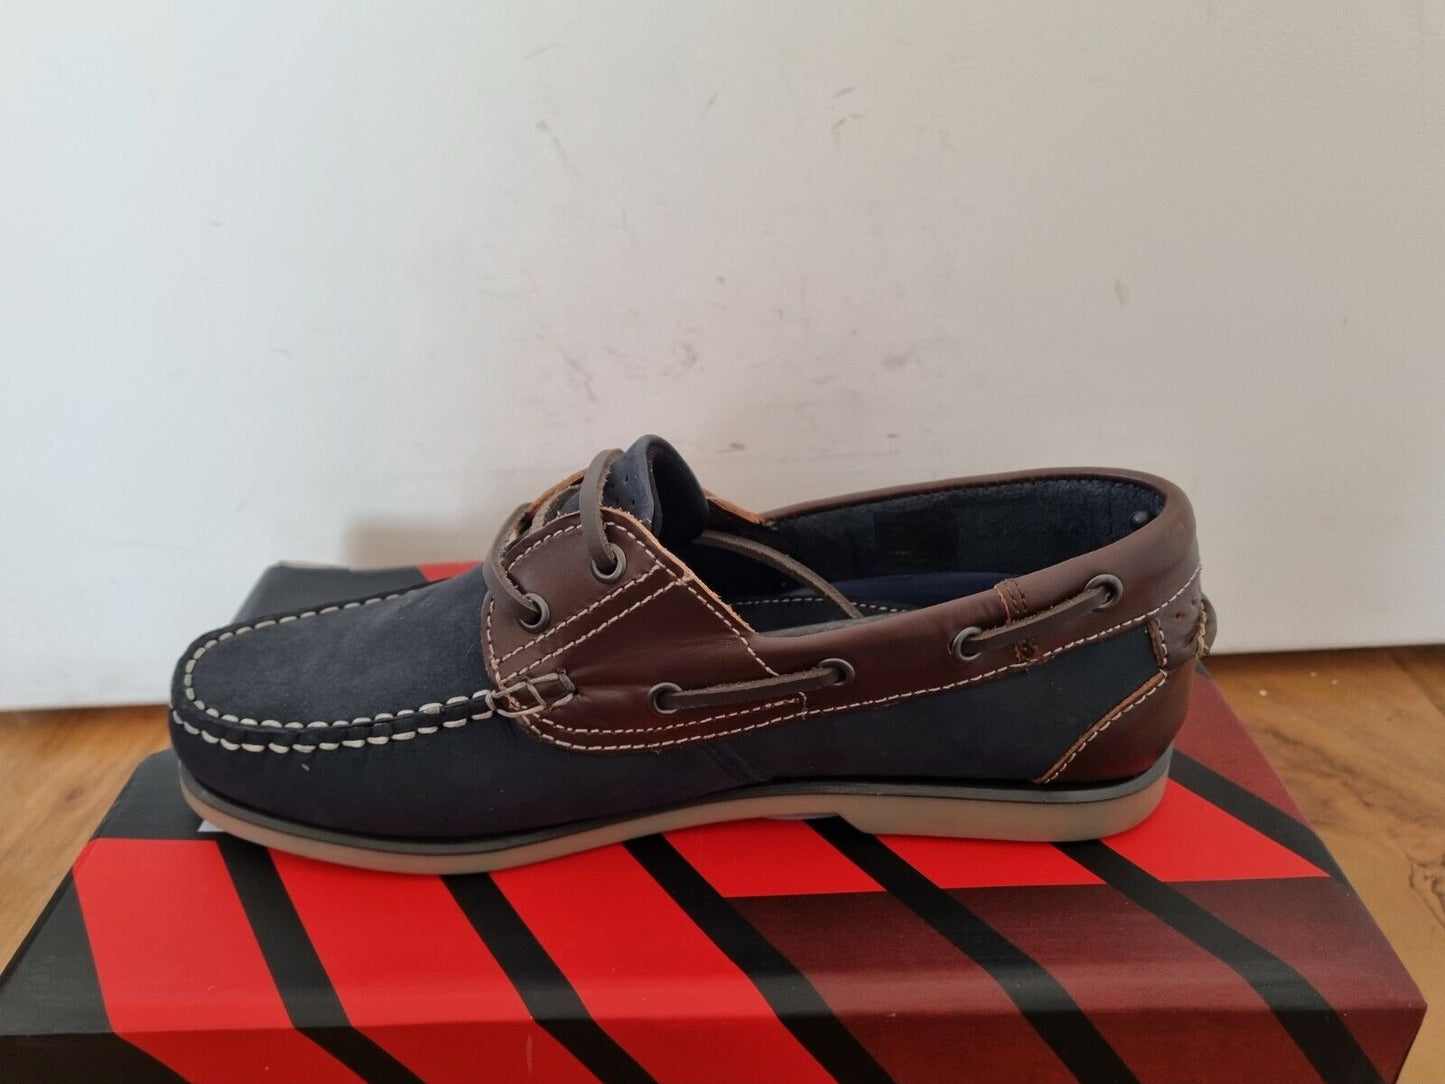 Boat Shoe by Dek - Navy Blue\Brown Lace Up Leather Boat Shoes